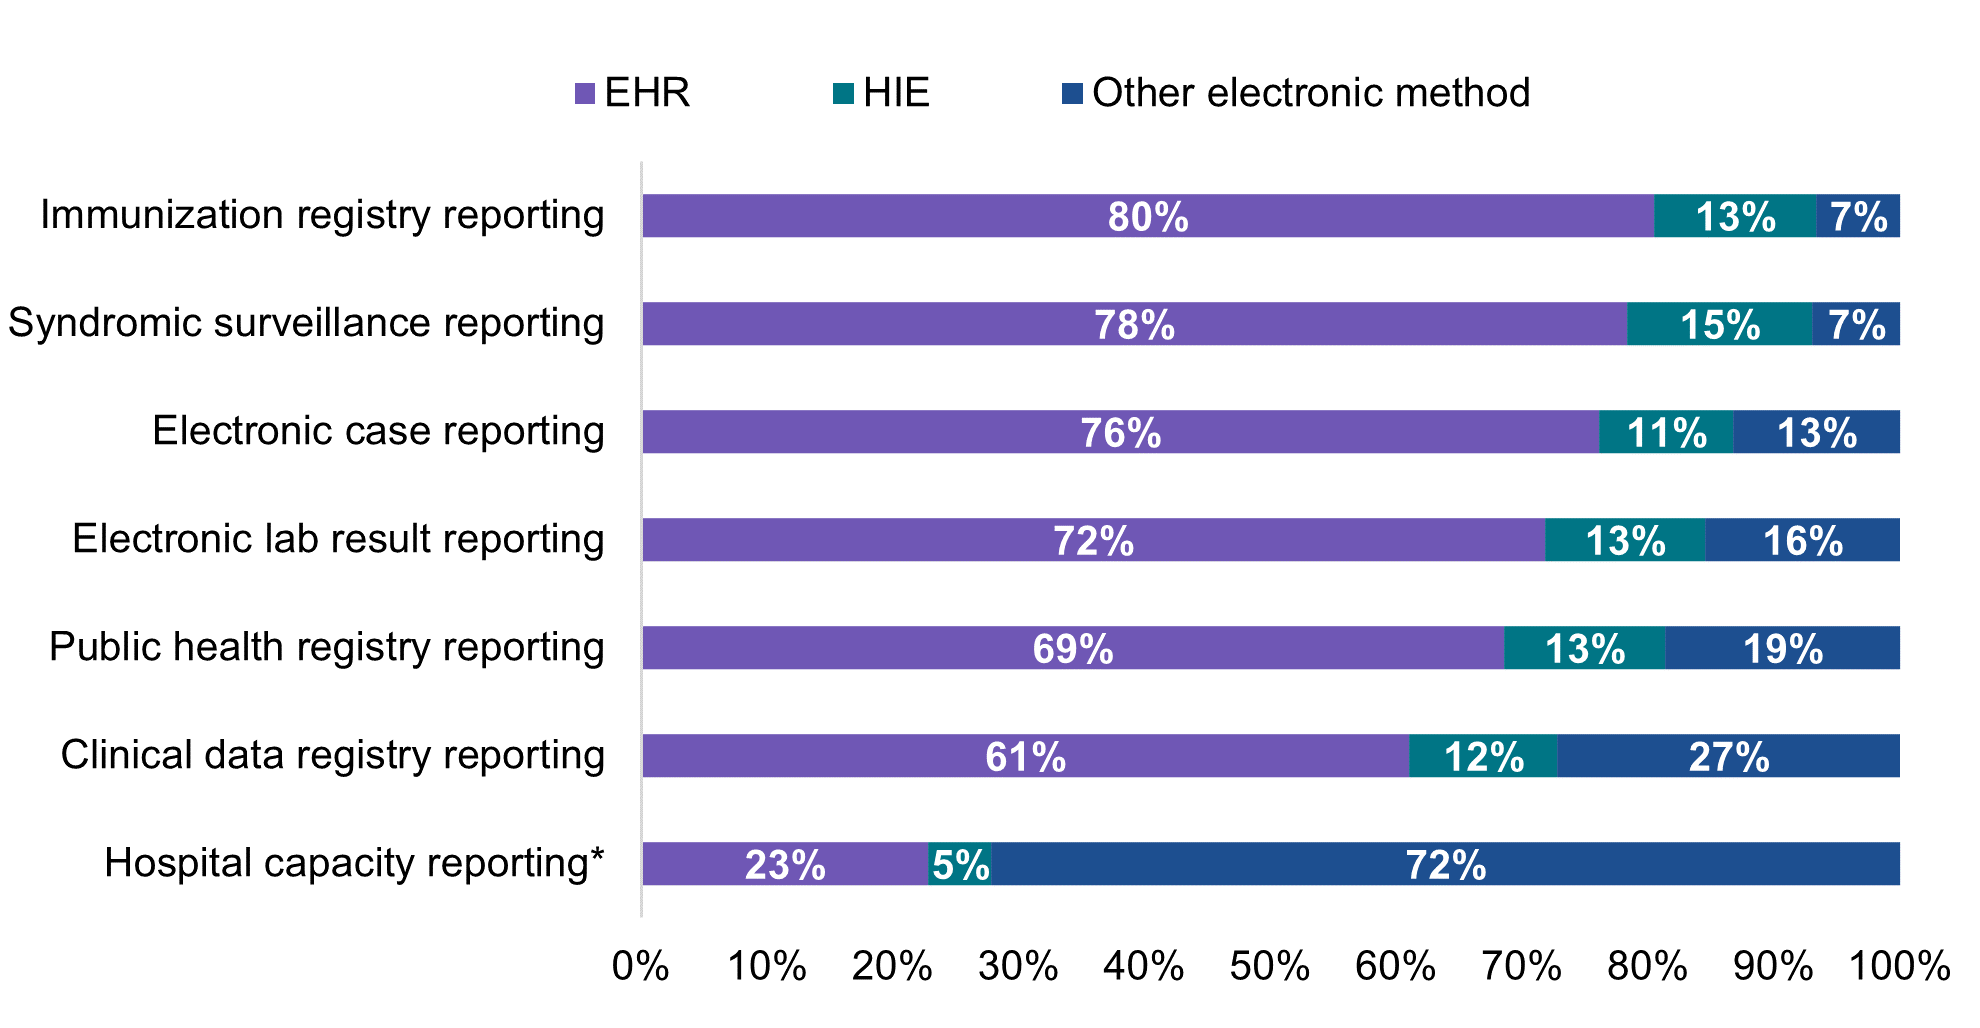 Figure 6 – Percent of non-federal acute care hospitals using mainly an EHR, HIE, or other electronic method to submit data for public health and hospital capacity reporting, 2021. This figure contains a horizontal stacked bar chart illustrating the percent of non-federal acute care hospitals that mainly used an EHR, HIE, or other electronic method to submit data for each of the six public health reporting types and hospital capacity reporting in 2021. The first bar shows that 80 percent of hospitals mainly used an EHR, 13 percent mainly used an HIE, and 7 percent mainly used another electronic method for immunization registry reporting in 2021. The second bar shows that 78 percent of hospitals mainly used an EHR, 15 percent mainly used an HIE, and 7 percent mainly used another electronic method for syndromic surveillance reporting in 2021. The third bar shows that 76 percent of hospitals mainly used an EHR, 11 percent mainly used an HIE, and 13 percent mainly used another electronic method for electronic case reporting in 2021. The fourth bar shows that 72 percent of hospitals mainly used an EHR, 13 percent mainly used an HIE, and 16 percent mainly used another electronic method for electronic lab result reporting in 2021. The fifth bar shows that 69 percent of hospitals mainly used an EHR, 13 percent mainly used an HIE, and 19 percent mainly used another electronic method for public health registry reporting in 2021. The sixth bar shows that 61 percent of hospitals mainly used an EHR, 12 percent mainly used an HIE, and 27 percent mainly used another electronic method for clinical data registry reporting in 2021. The seventh bar shows that 23 percent of hospitals mainly used an EHR, 5 percent mainly used an HIE, and 72 percent mainly used another electronic method for hospital capacity reporting in 2021. 